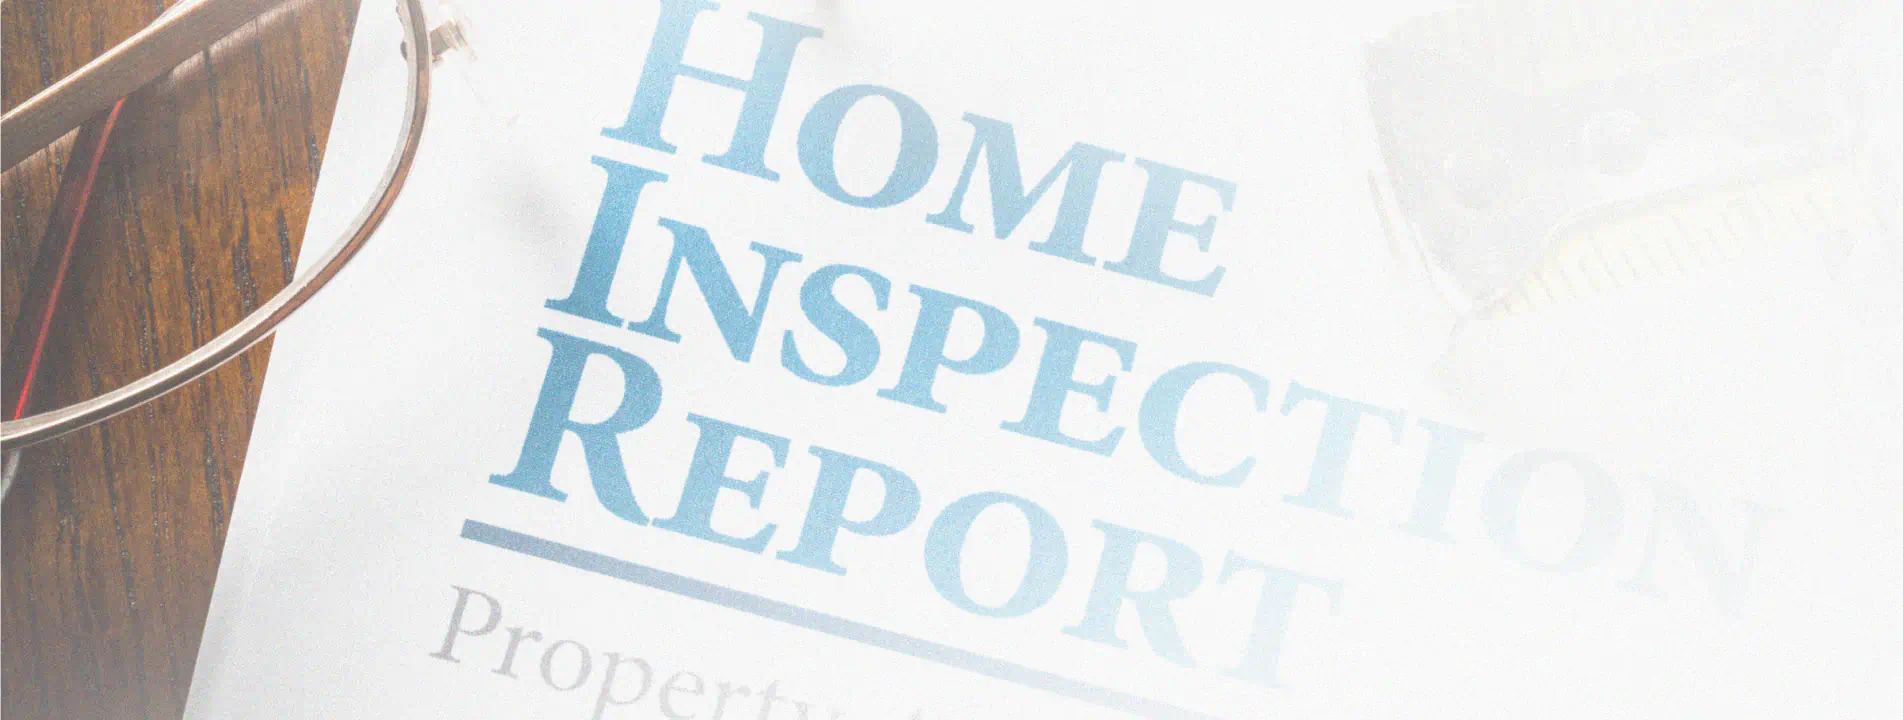 close up shot inspection report